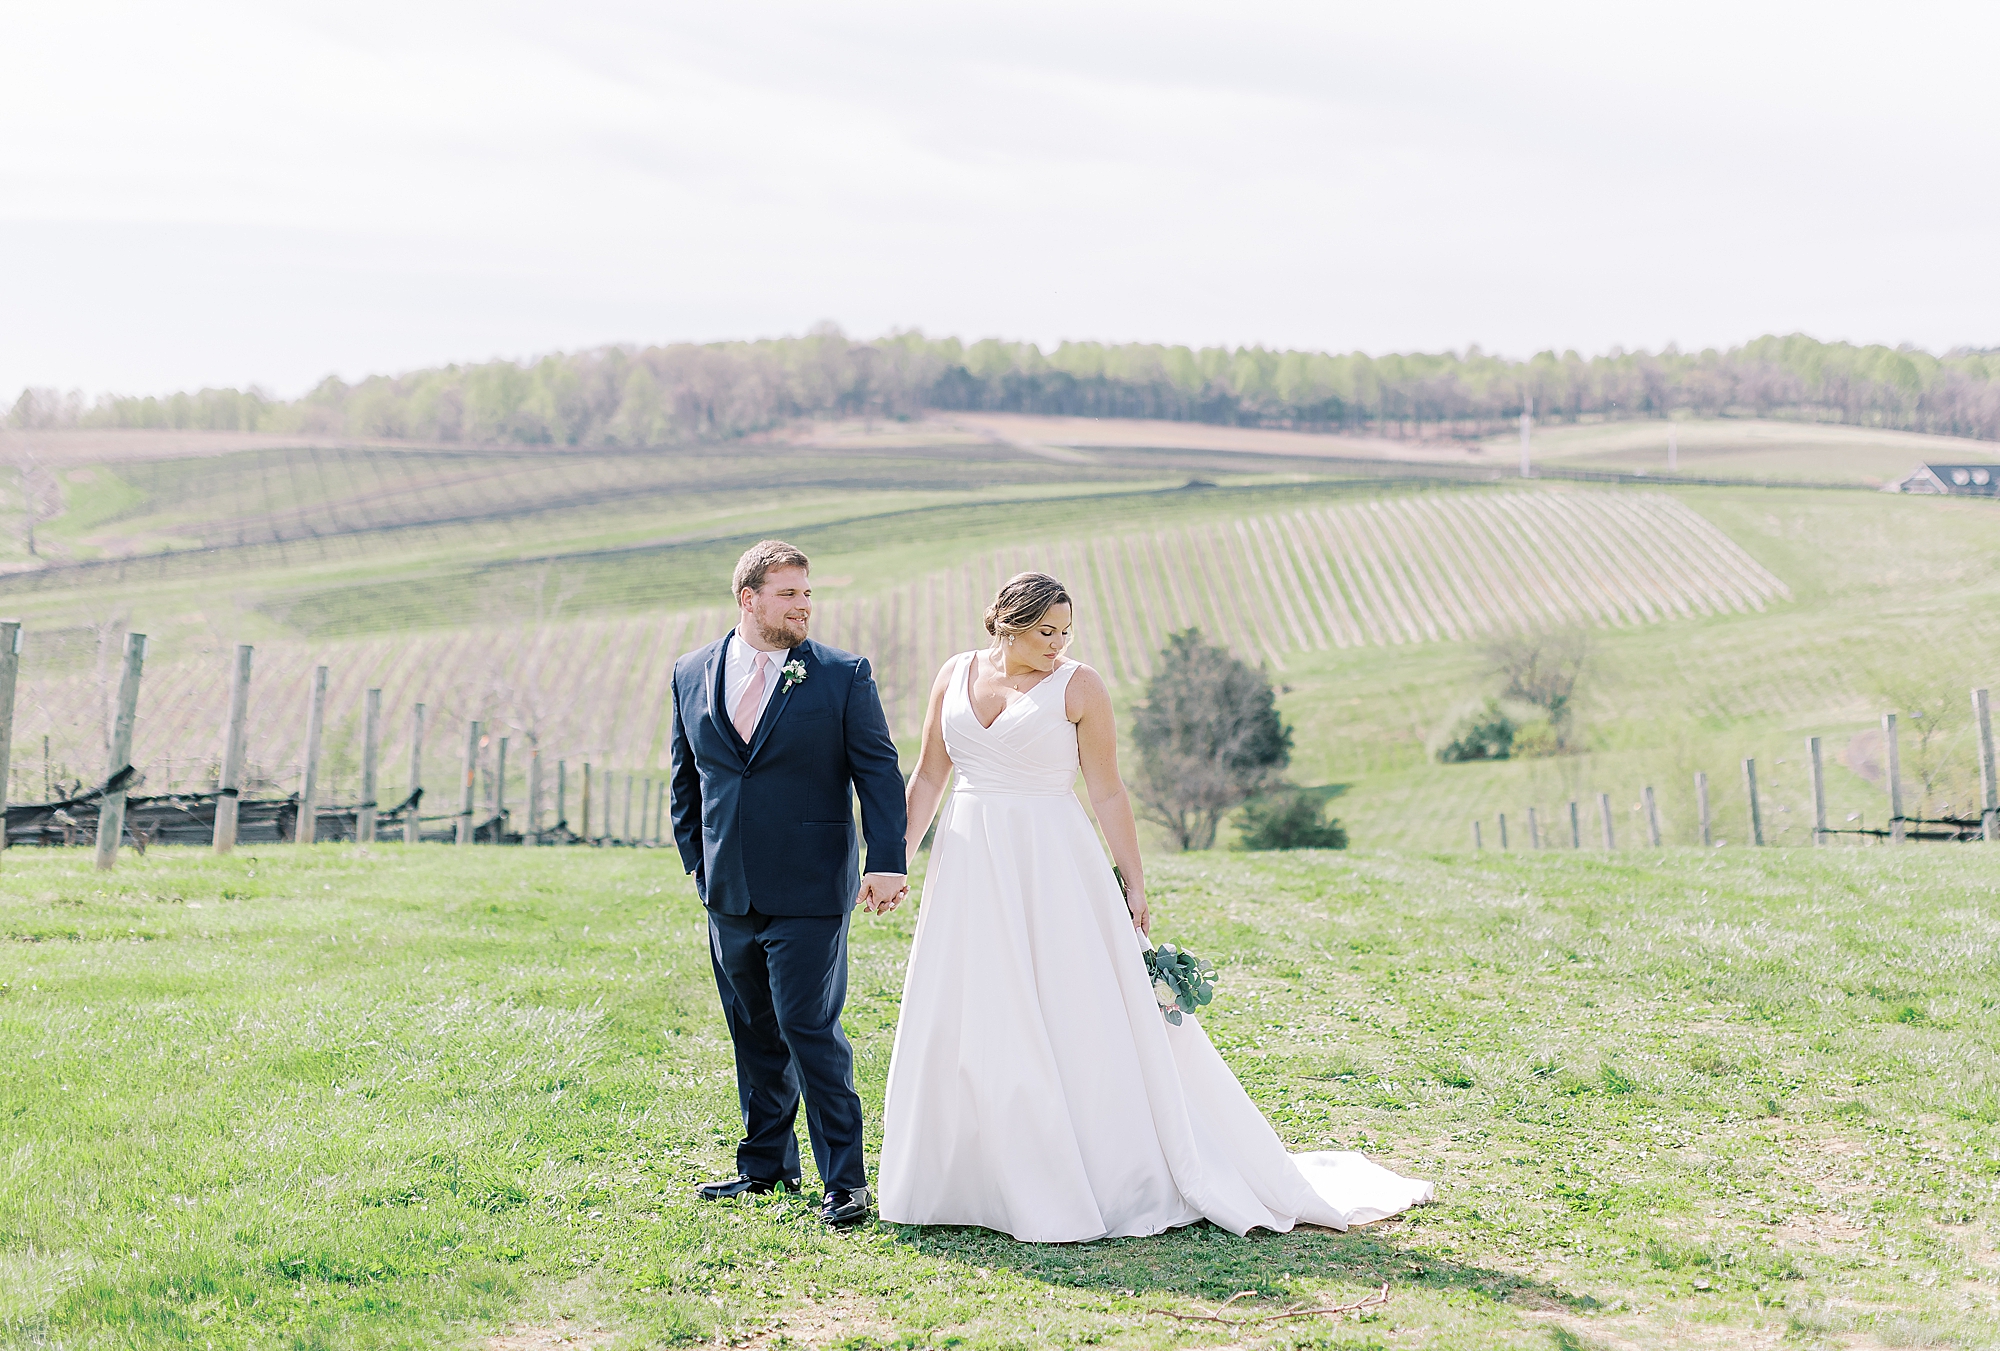 Bride and groom portrait at Stone Tower Winery.